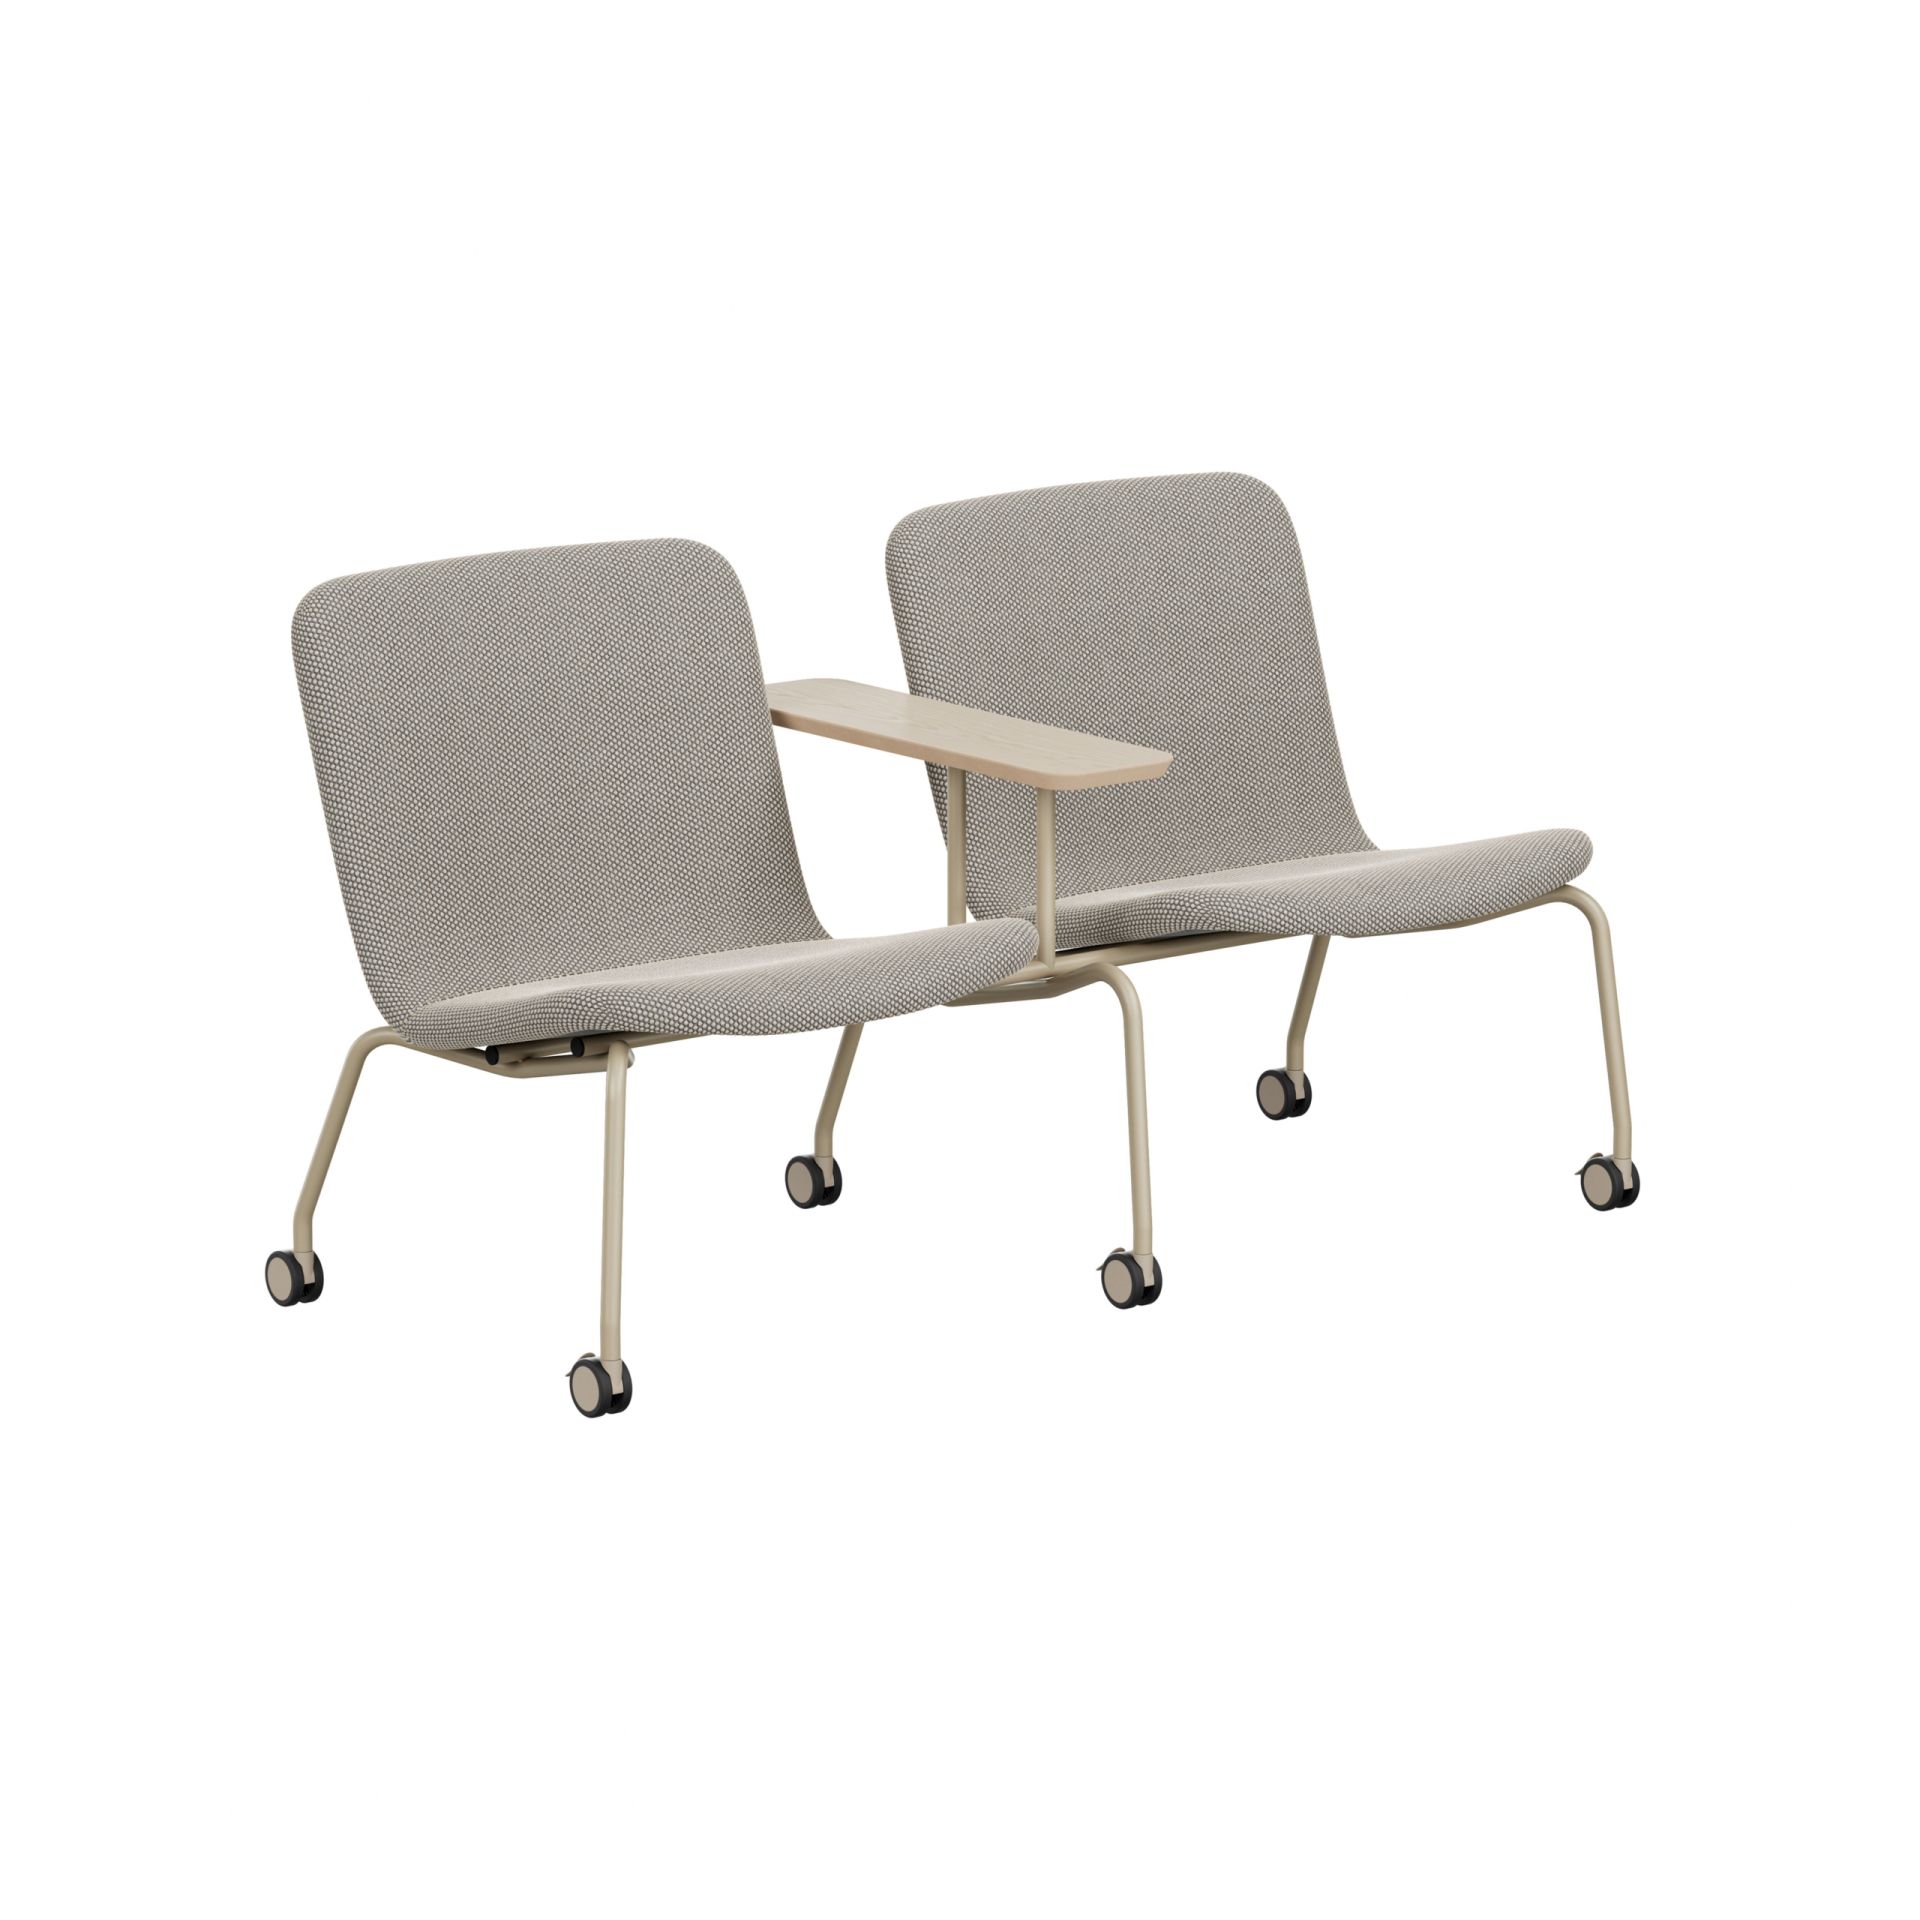 Hybe 2-seater product image 2